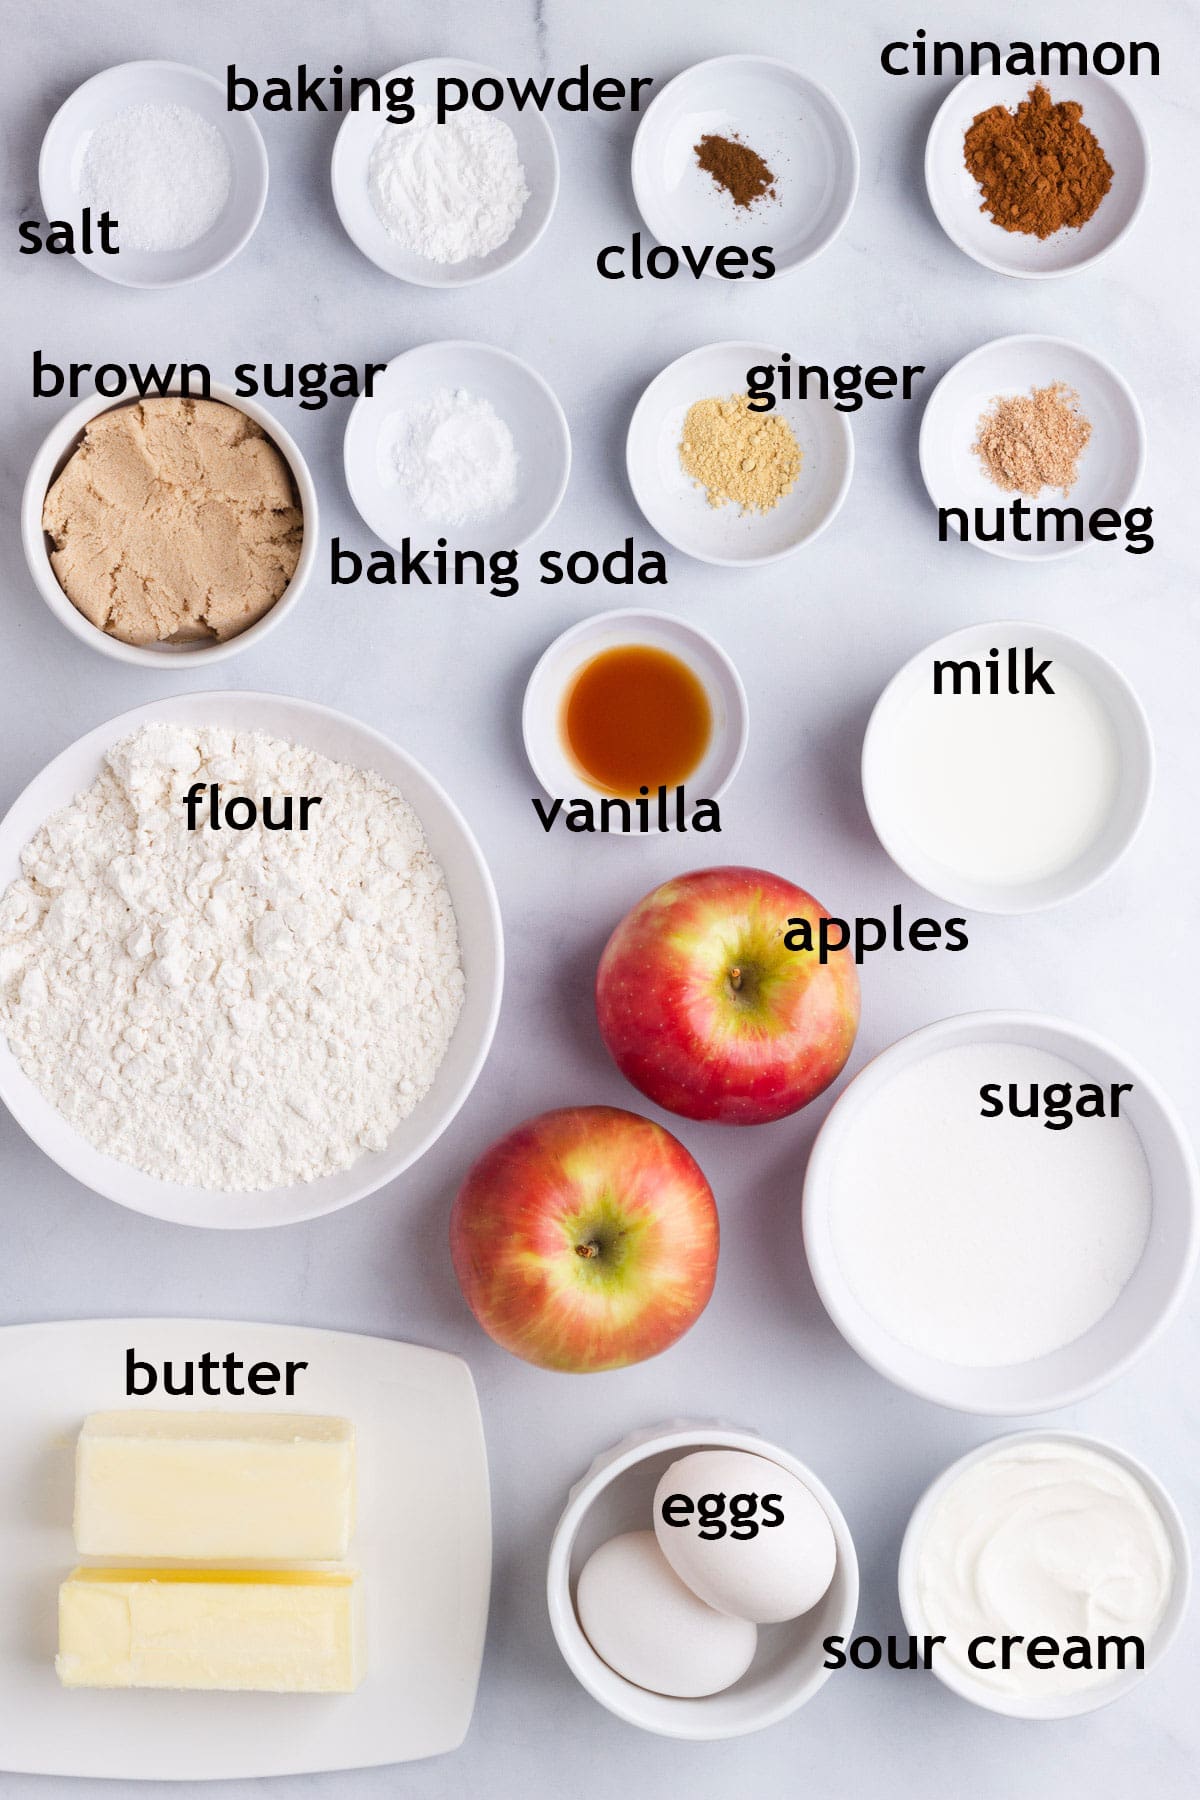 Muffin Ingredients including apples, flour, brown sugar, white sugar, butter, eggs, sour cream and spices.